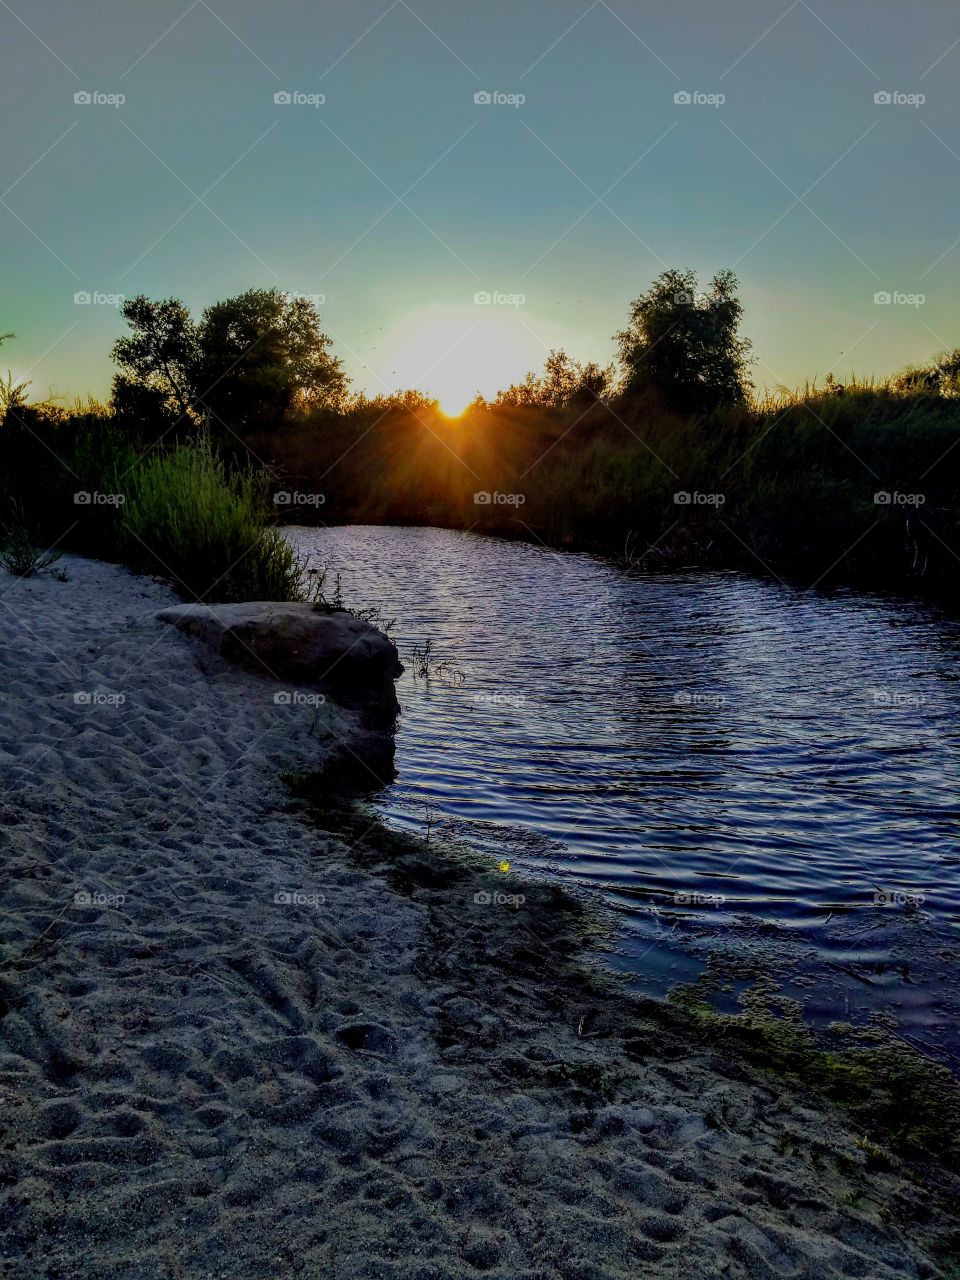 Evening sunset in Temecula California down by the river